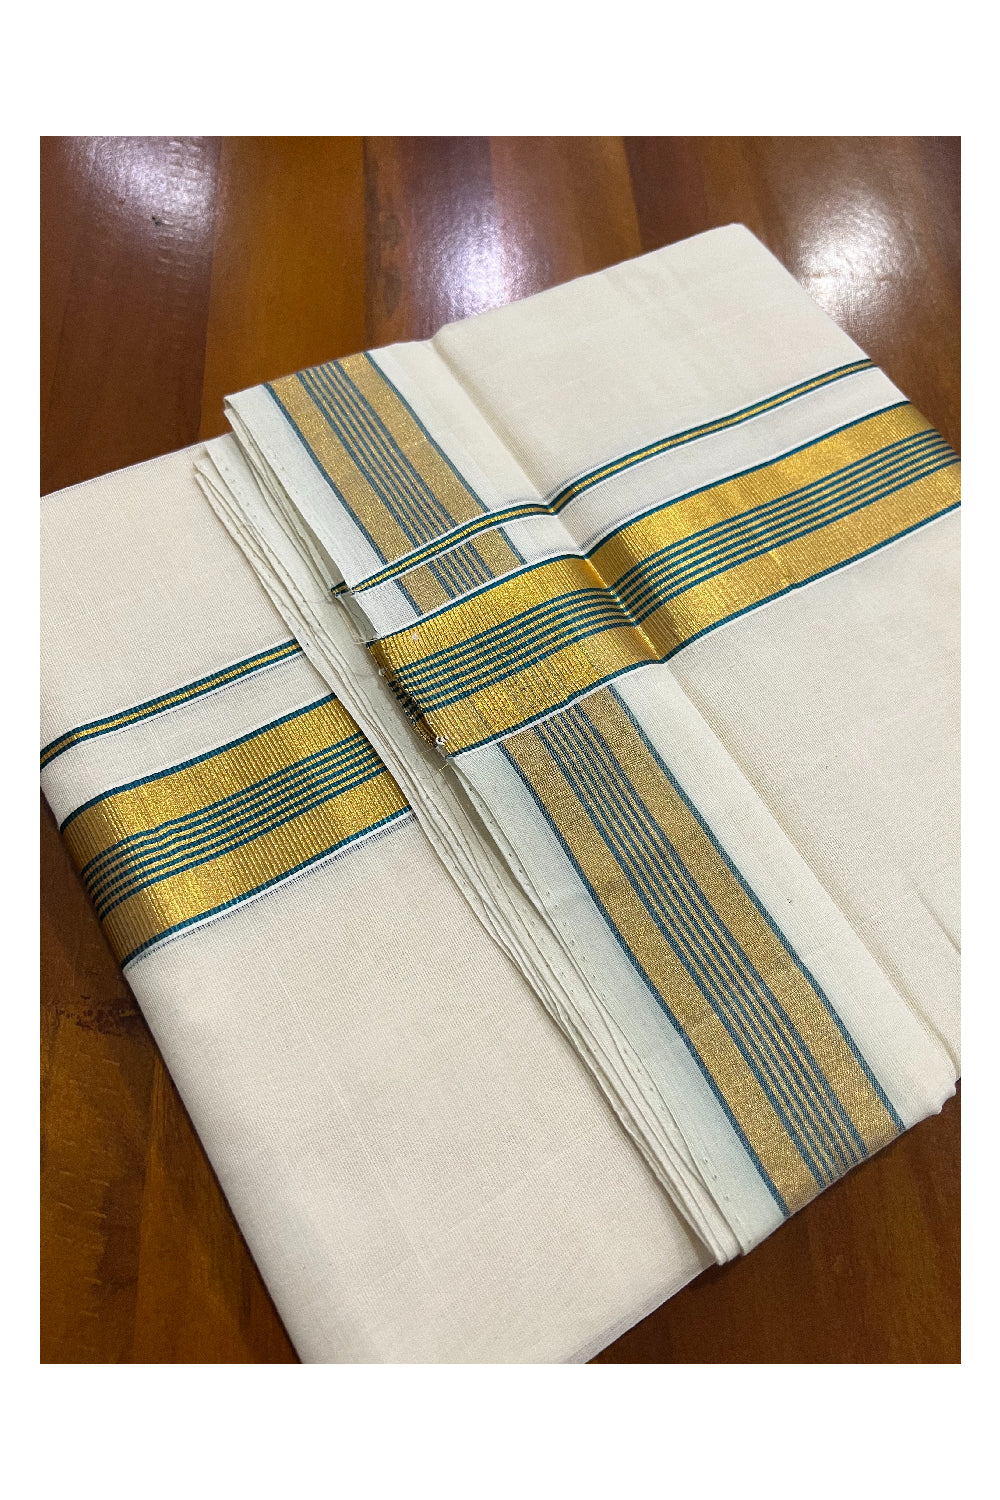 Southloom Kuthampully Handloom Pure Cotton Mundu with Golden and Green Kasavu Line Border (South Indian Dhoti)